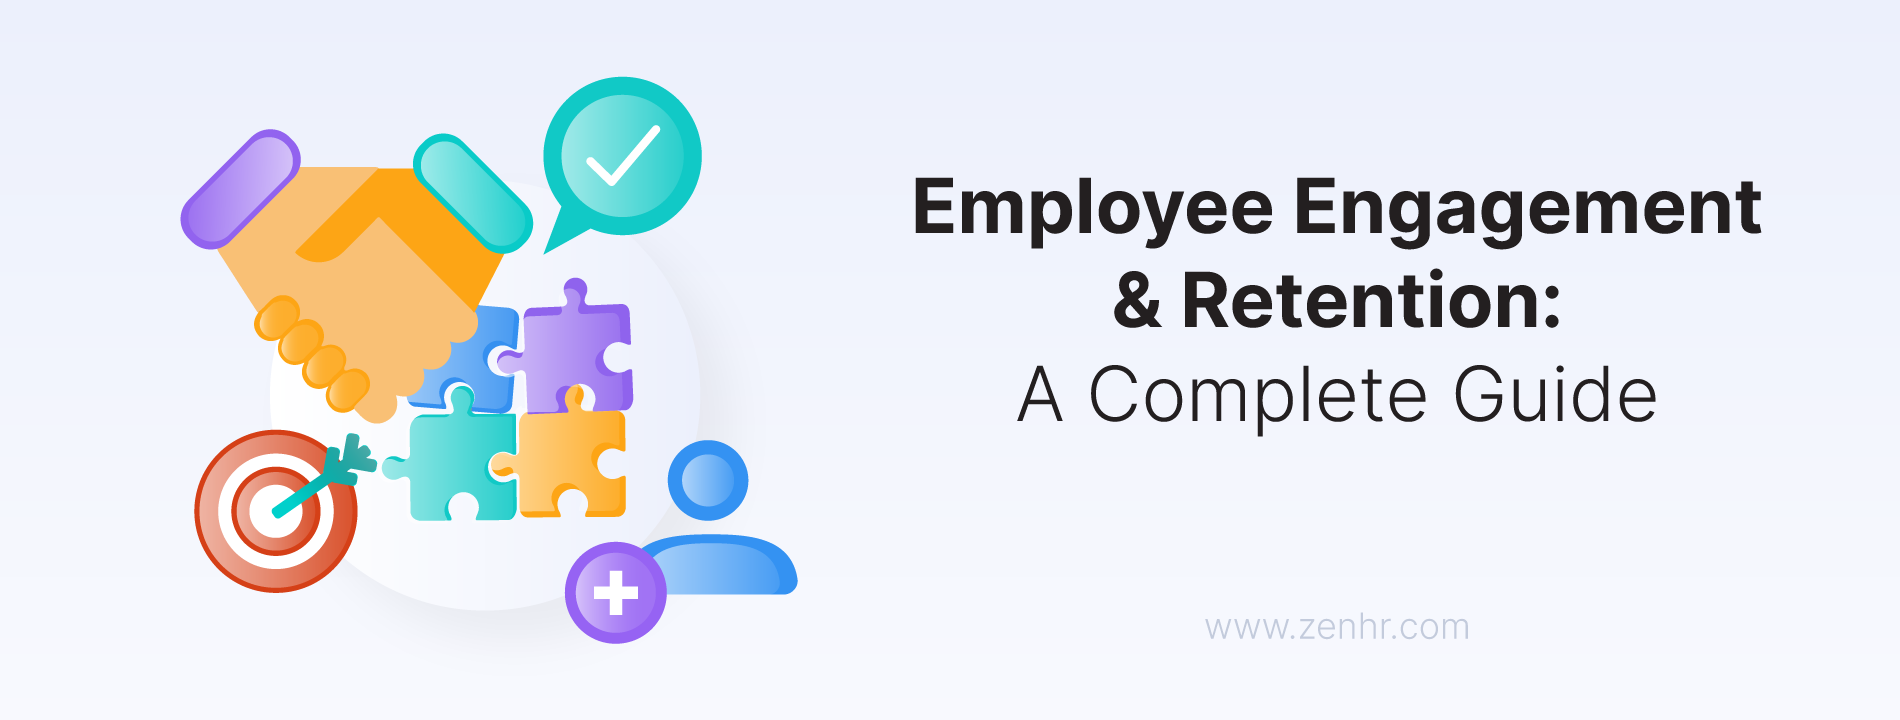 Employee Engagement & Retention: A Complete Guide